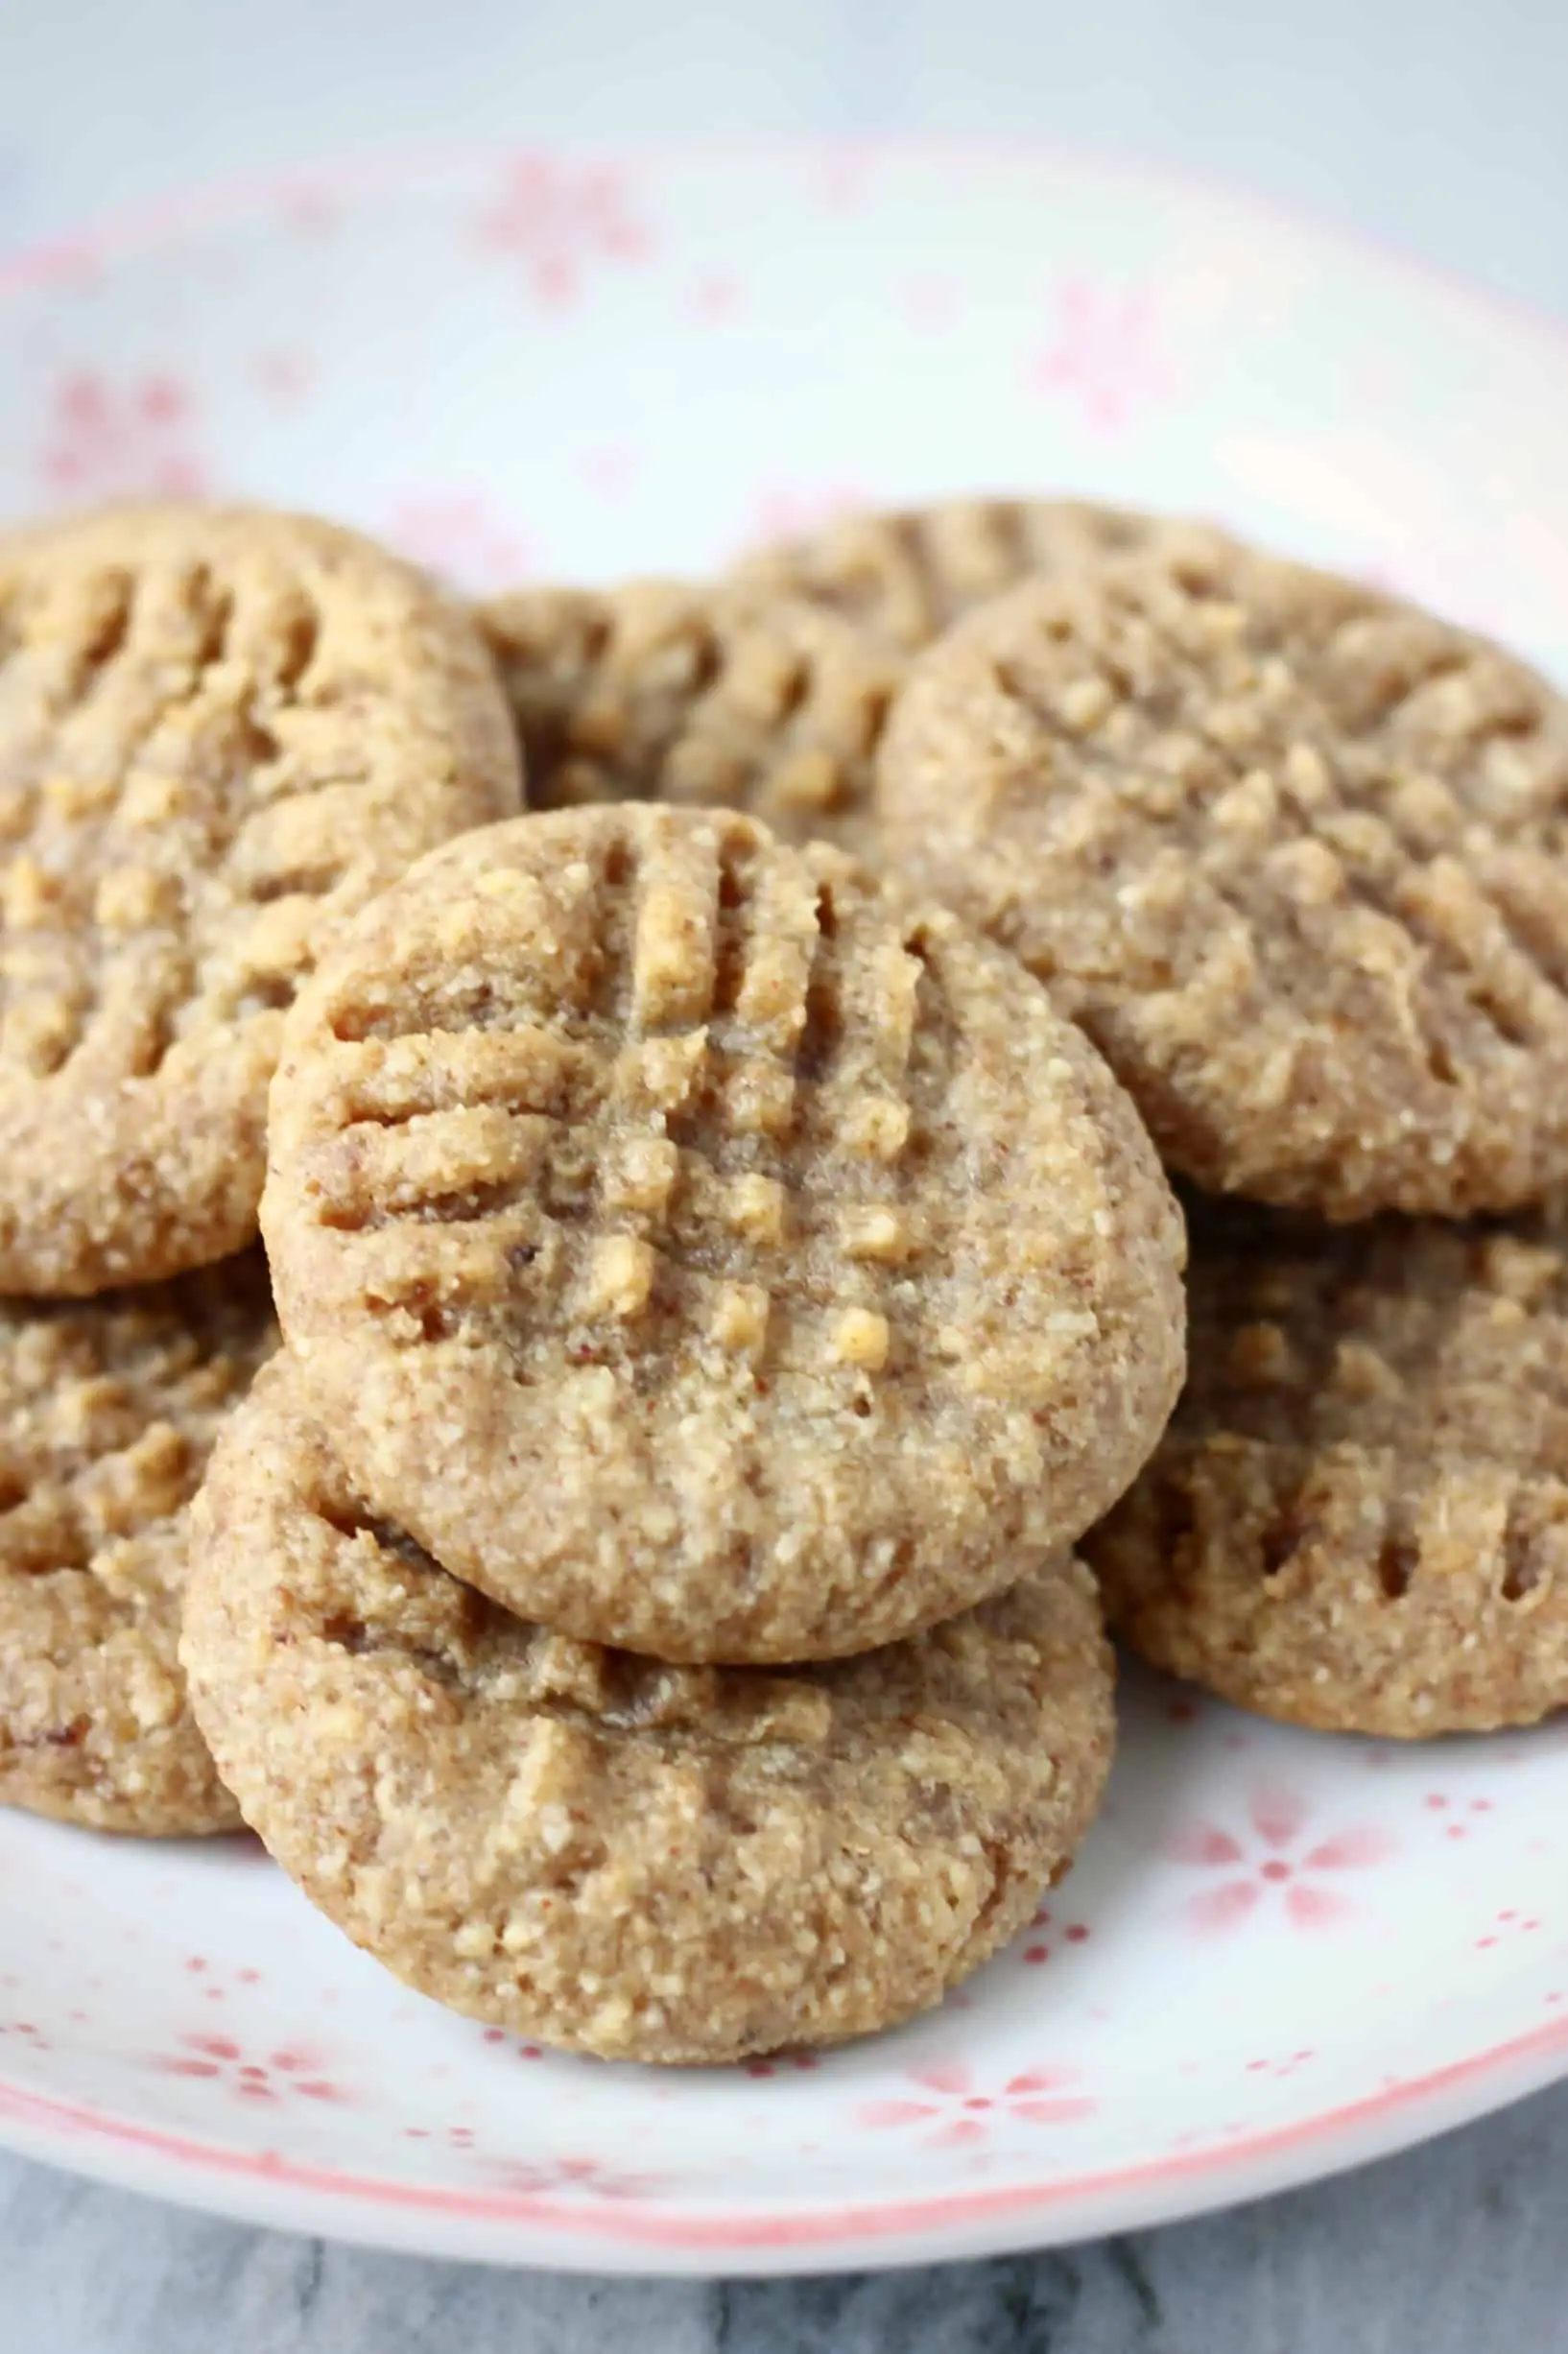 A pile of gluten-free vegan peanut butter cookies on a plate